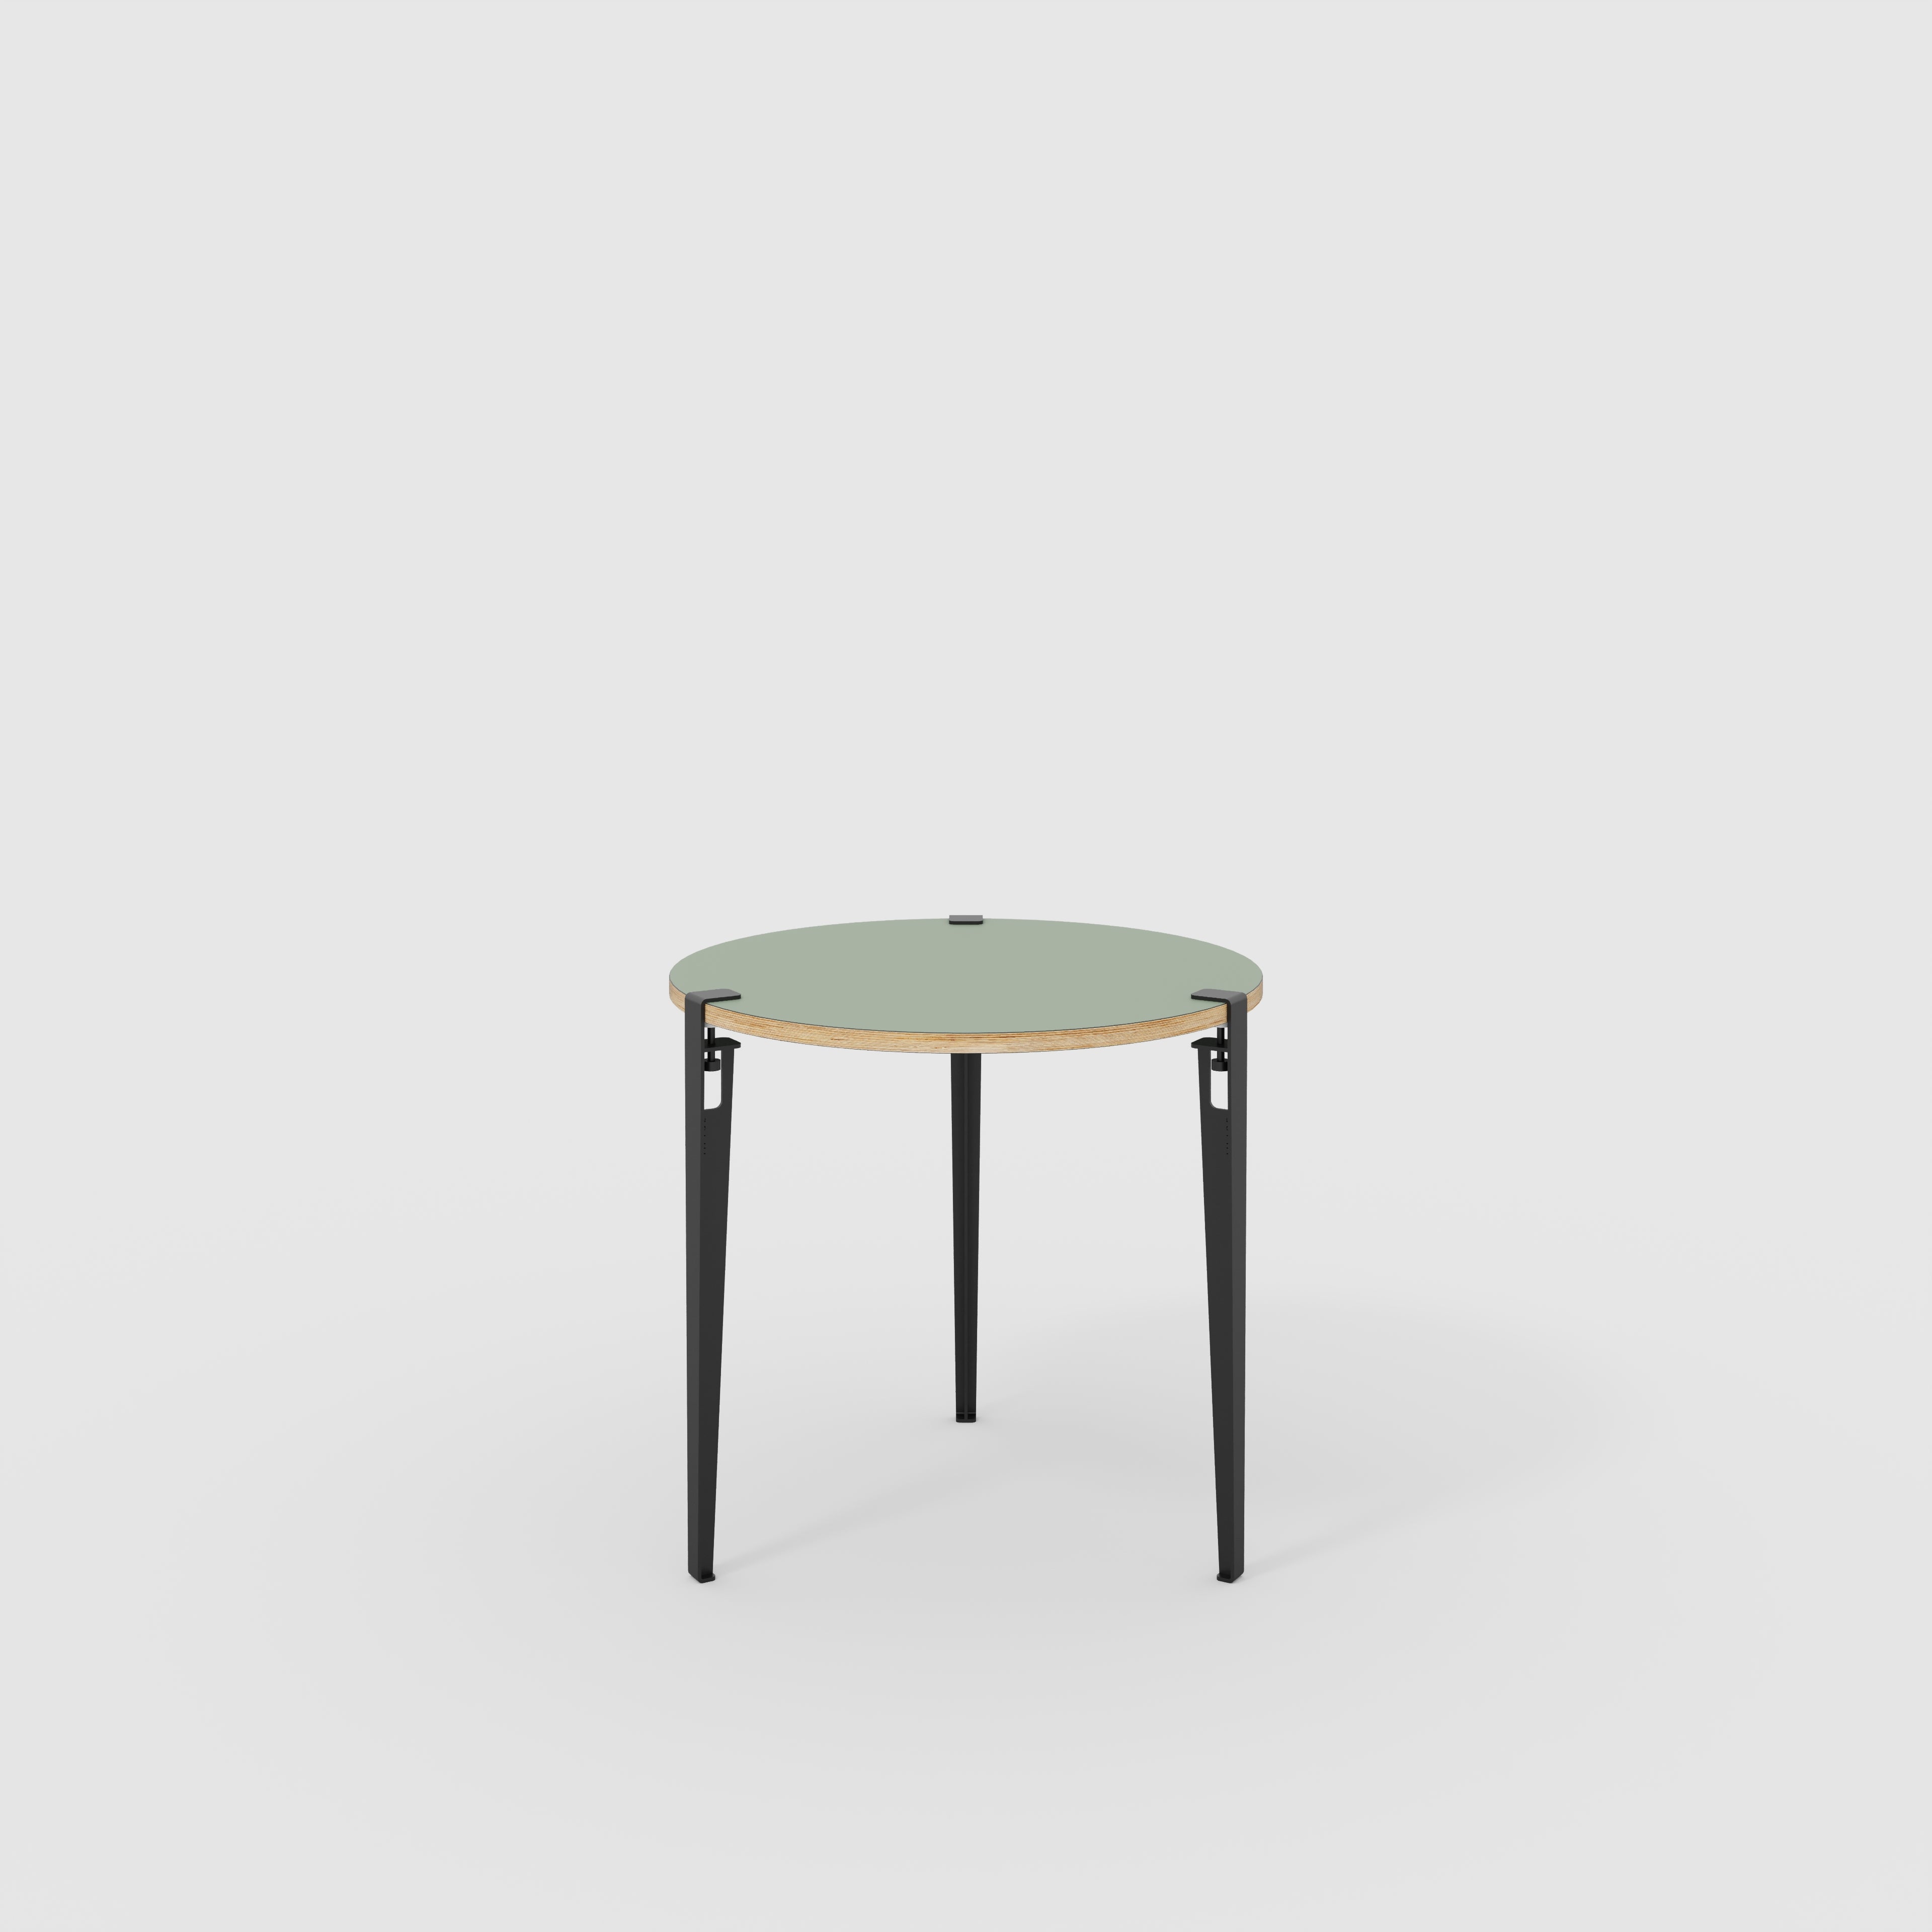 Round Table with Black Tiptoe Legs - Formica Green Slate - 800(dia) x 750(h)